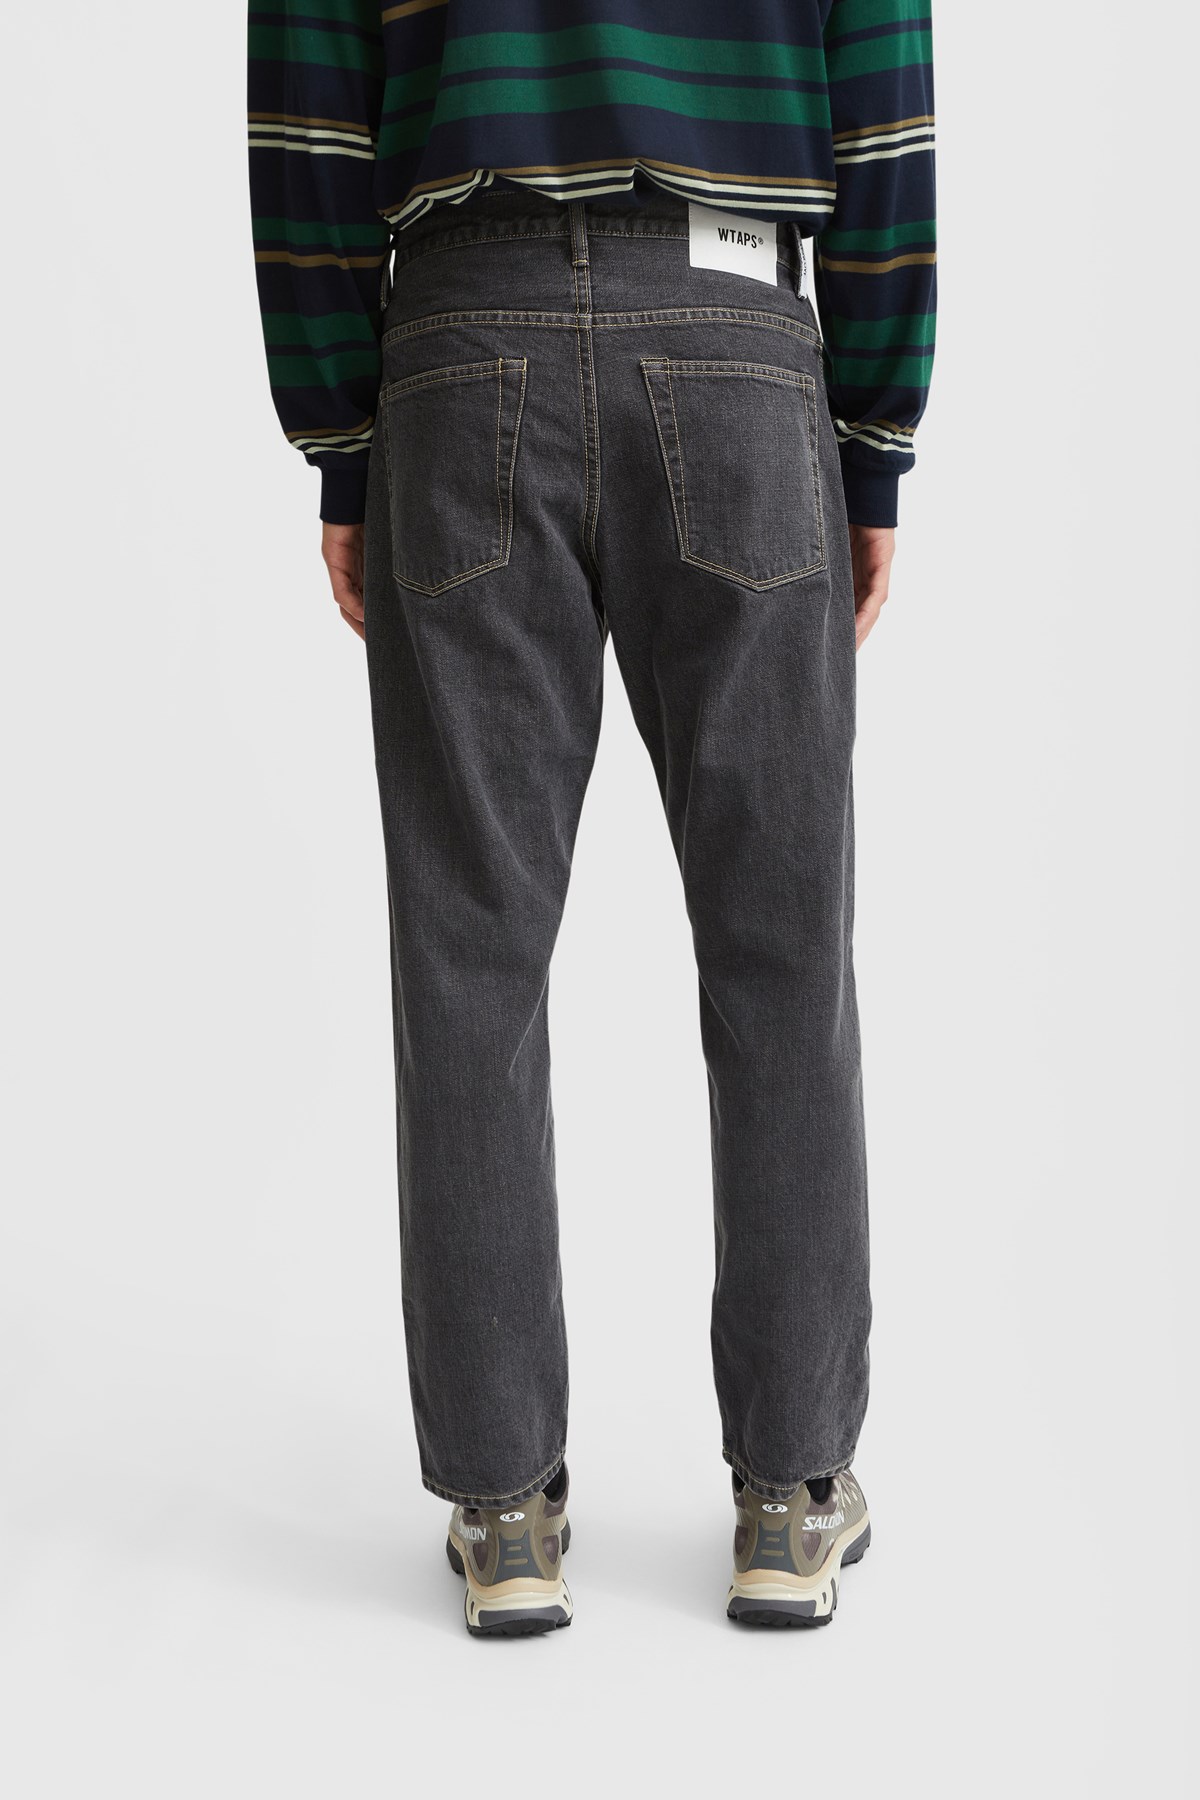 WTAPS BLUES BAGGY / TROUSERS DENIME-